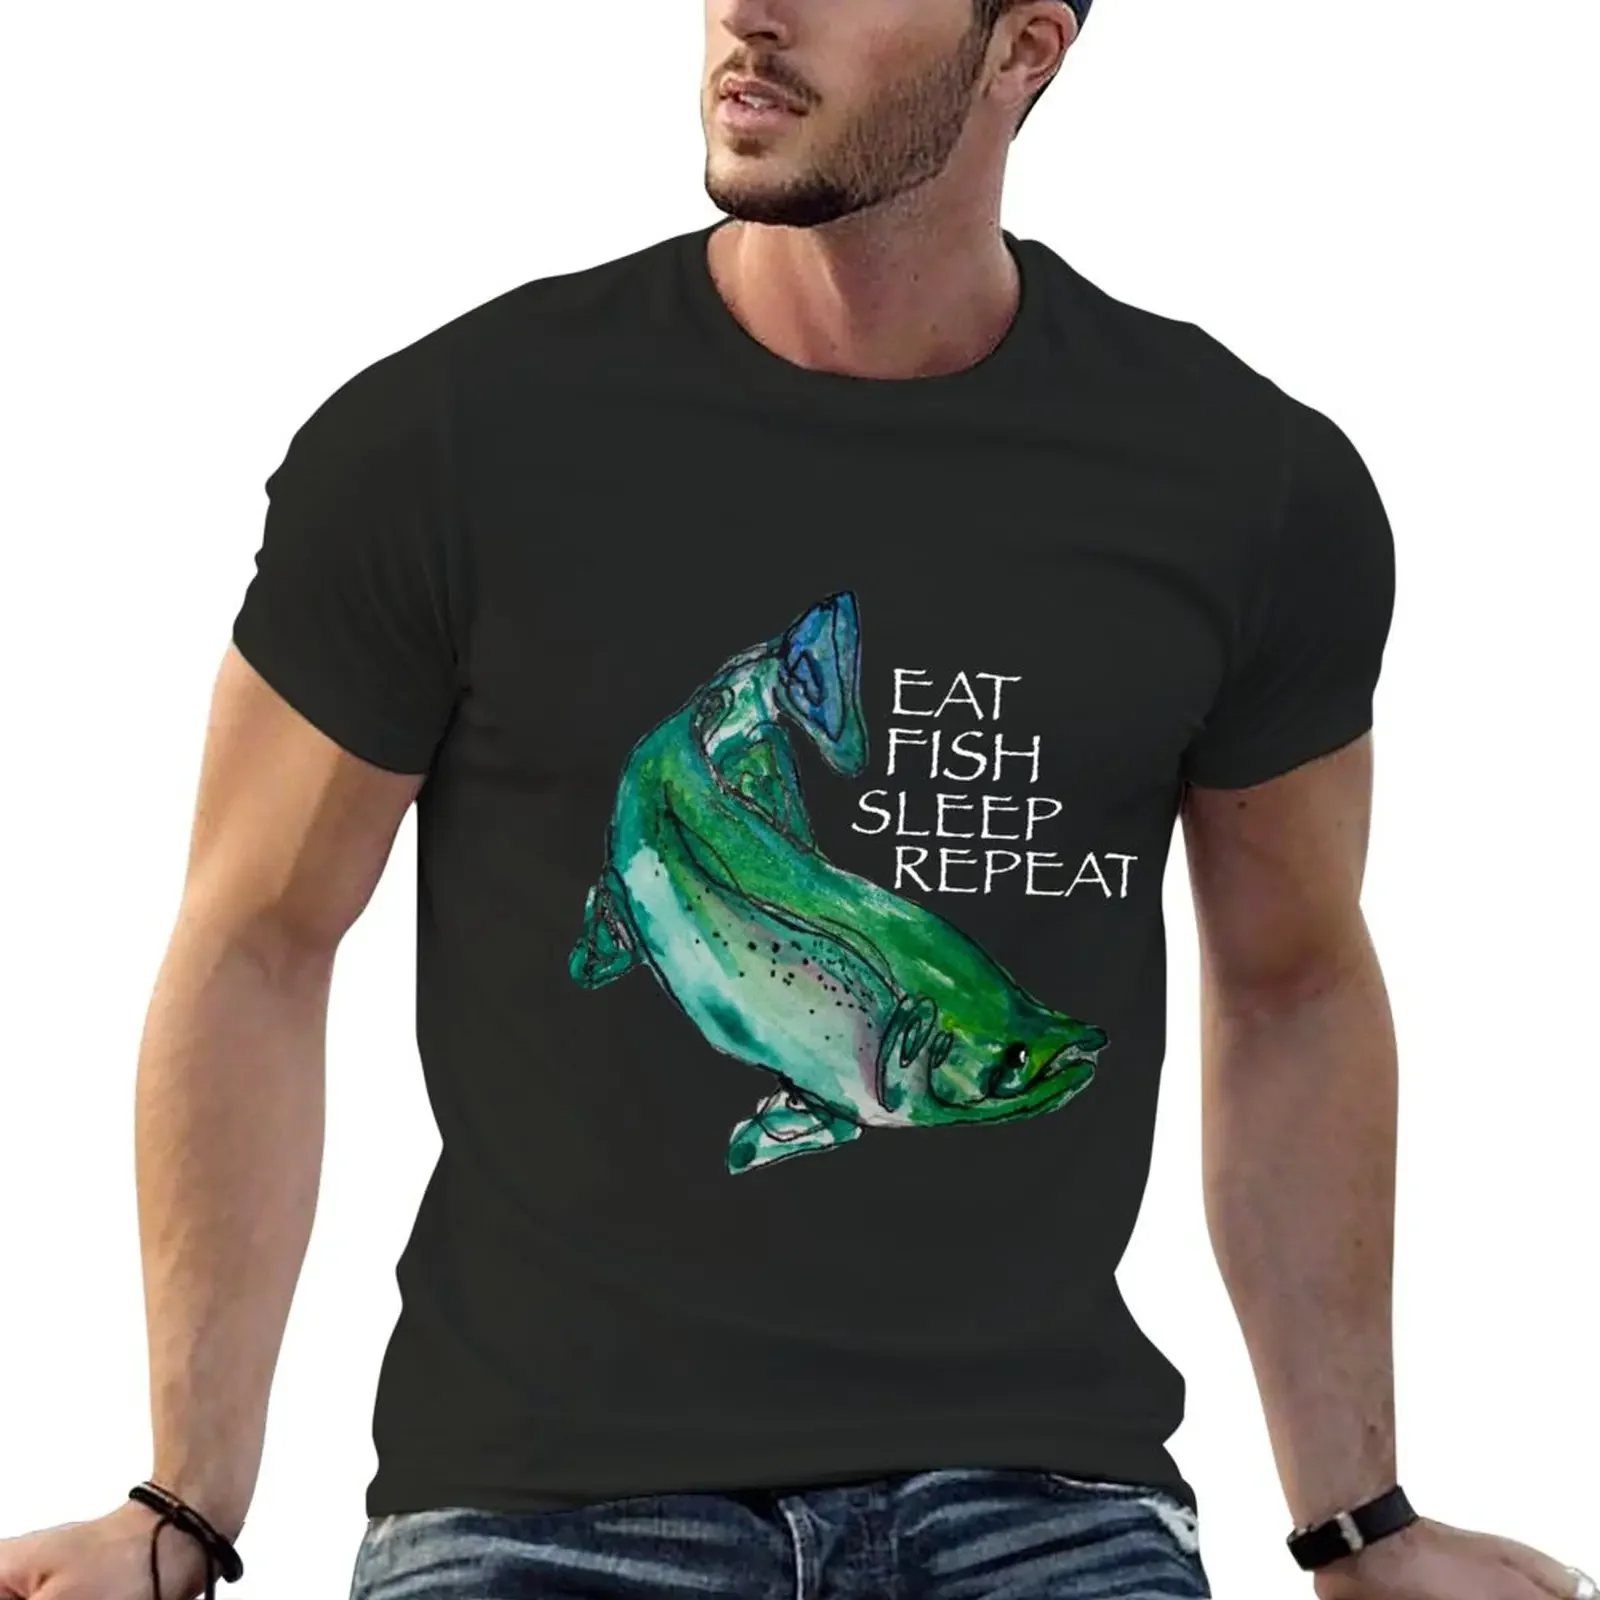 

Eat Fish Sleep Repeat (white words) T-Shirt oversizeds plus sizes t shirts for men pack